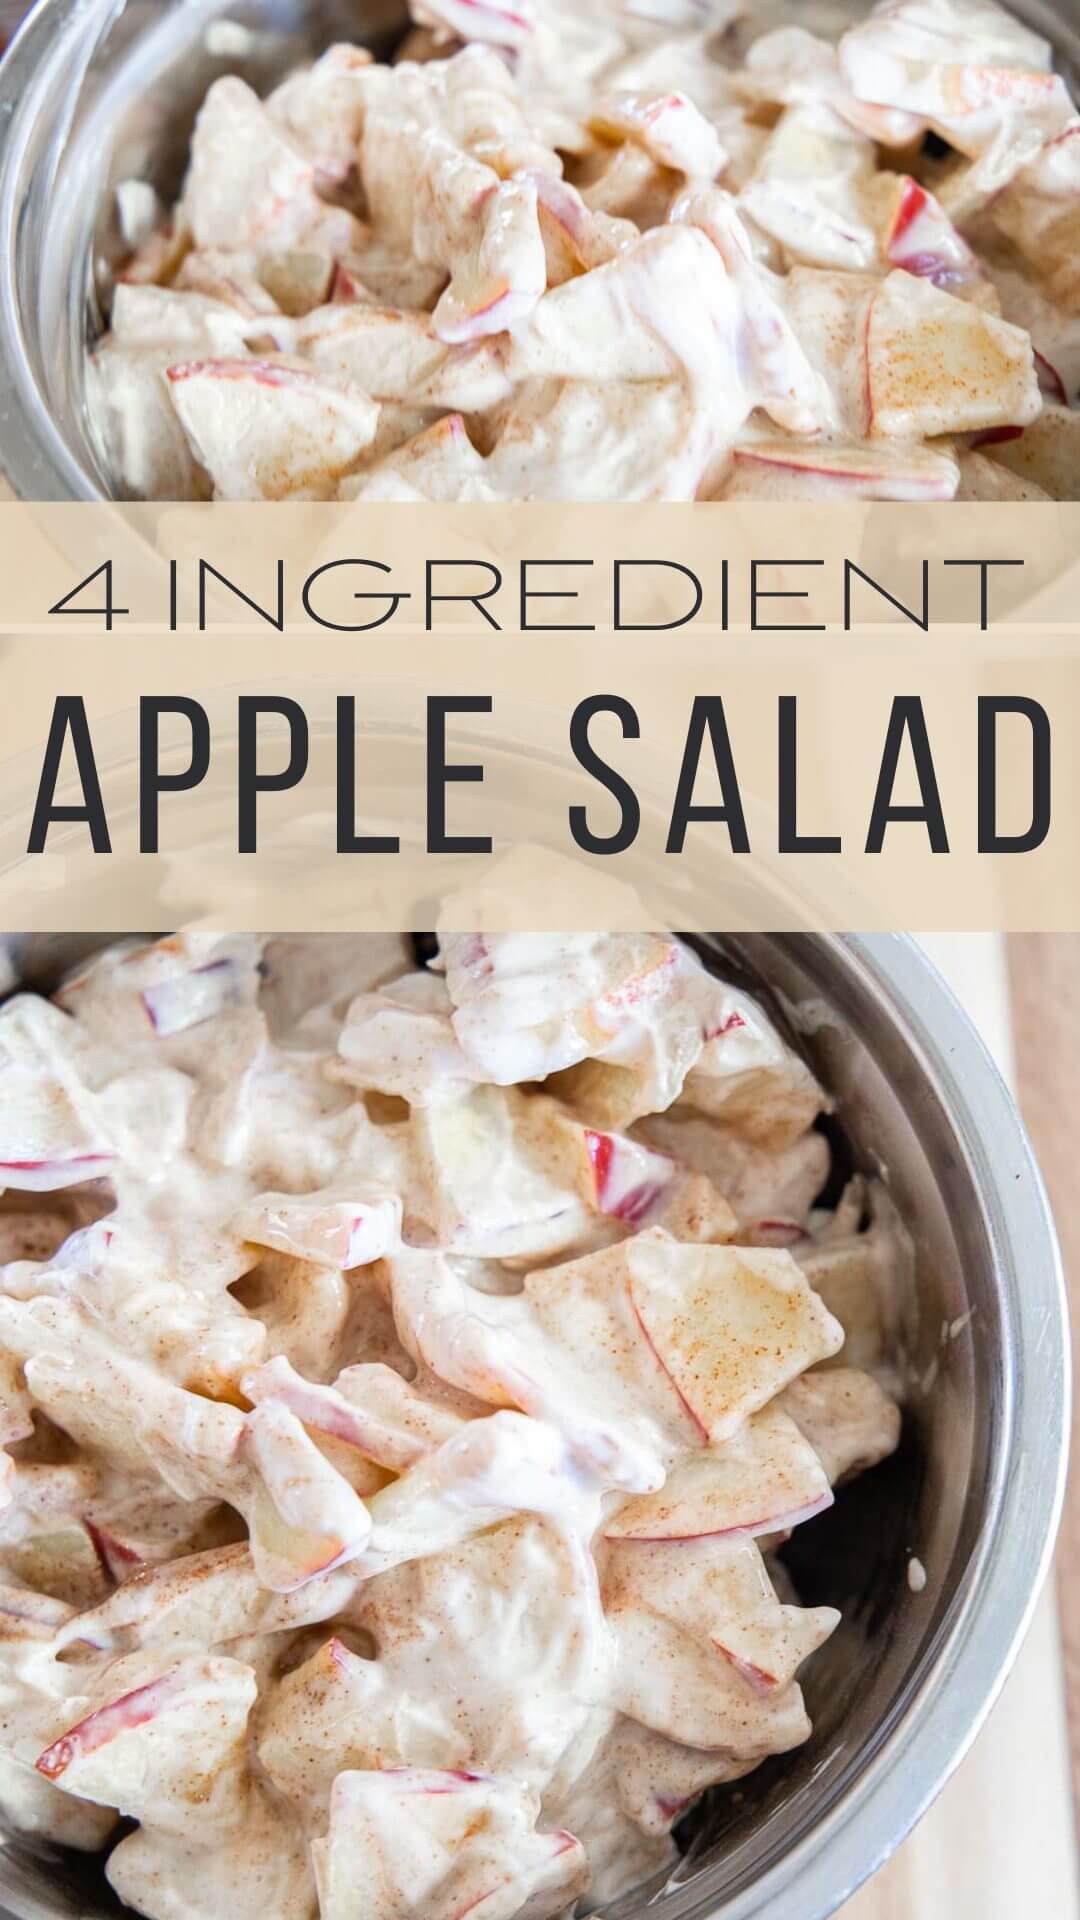 Make this easy 4 ingredient apple salad that is a great high protein snack or dessert! Its easy to make and tastes amazing.